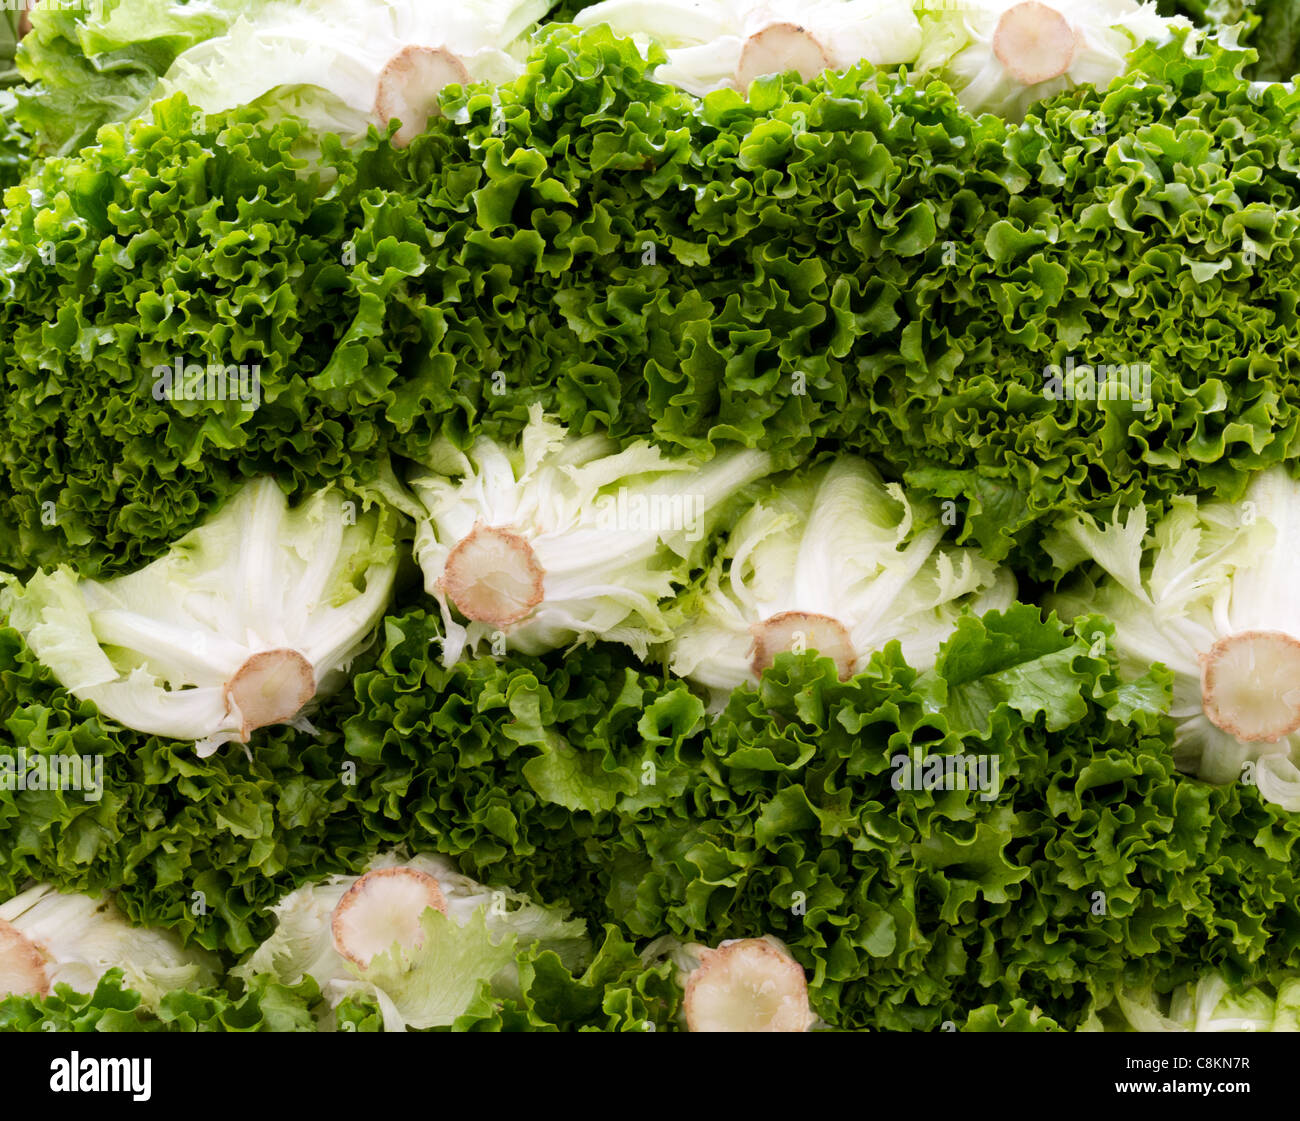 Fresh picked green leaf lettuce on display at the farmer's market Stock Photo